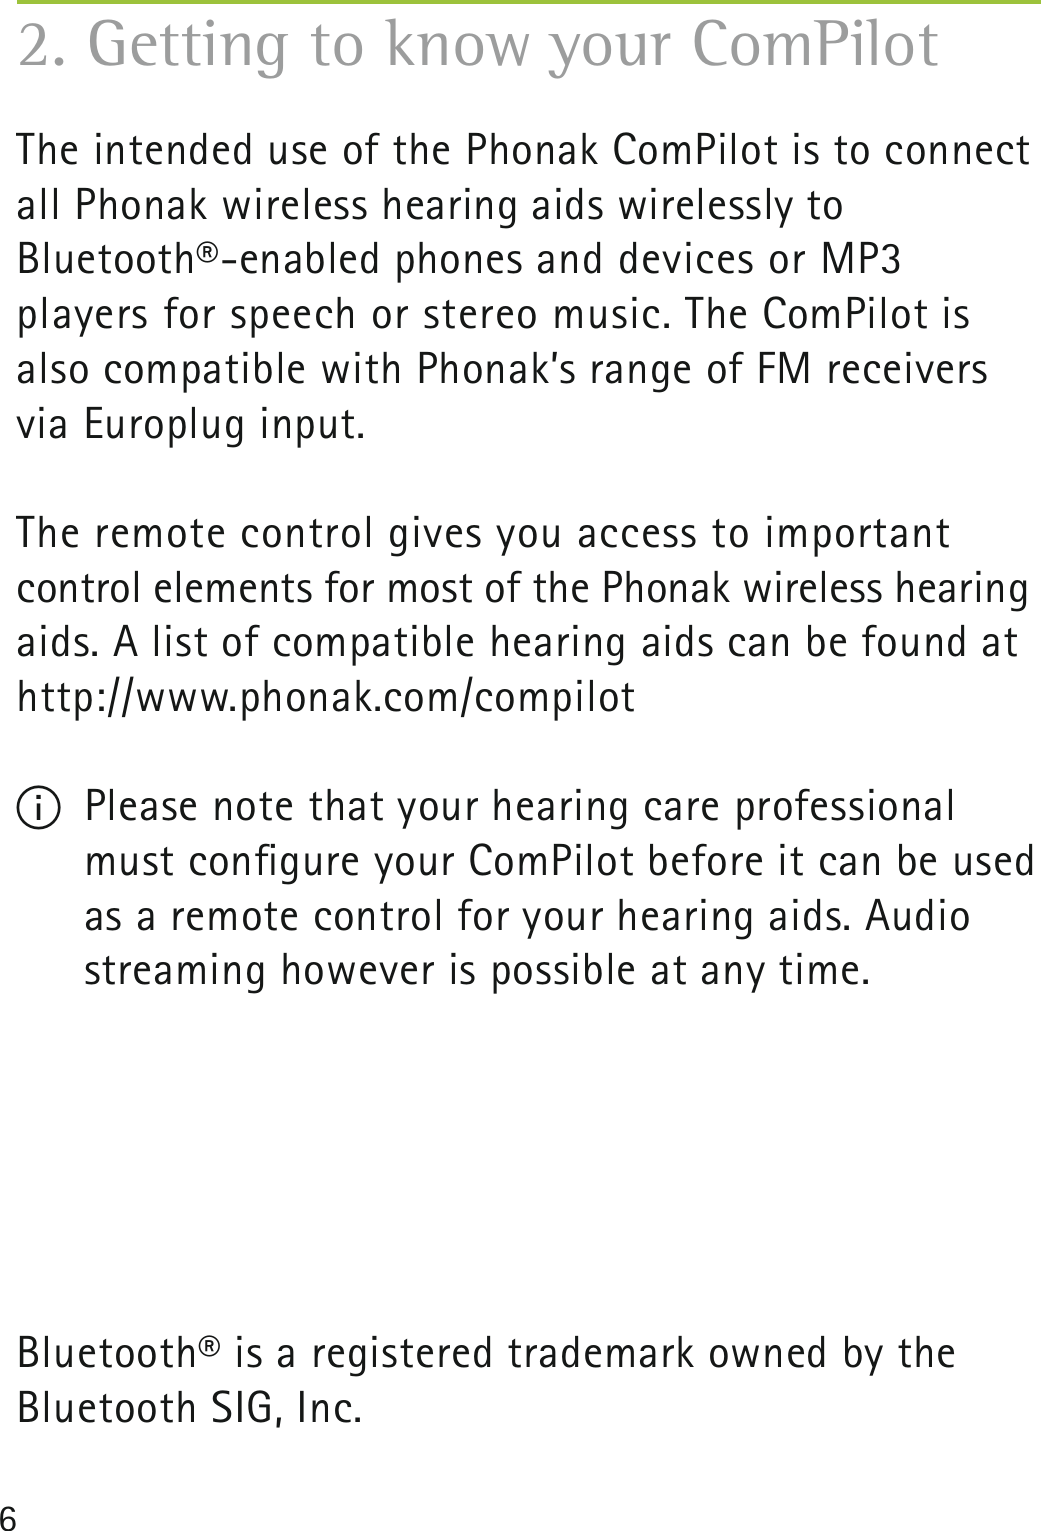 6The intended use of the Phonak ComPilot is to connect all Phonak wireless hearing aids wirelessly to Bluetooth®-enabled phones and devices or MP3  players for speech or stereo music. The ComPilot is also compatible with Phonak’s range of FM receivers via Europlug input. The remote control gives you access to important  control elements for most of the Phonak wireless hearing aids. A list of compatible hearing aids can be found at http://www.phonak.com/compilotI  Please note that your hearing care professional must conﬁgure your ComPilot before it can be used as a remote control for your hearing aids. Audio streaming however is possible at any time.Bluetooth® is a registered trademark owned by the  Bluetooth SIG, Inc.2. Getting to know your ComPilot